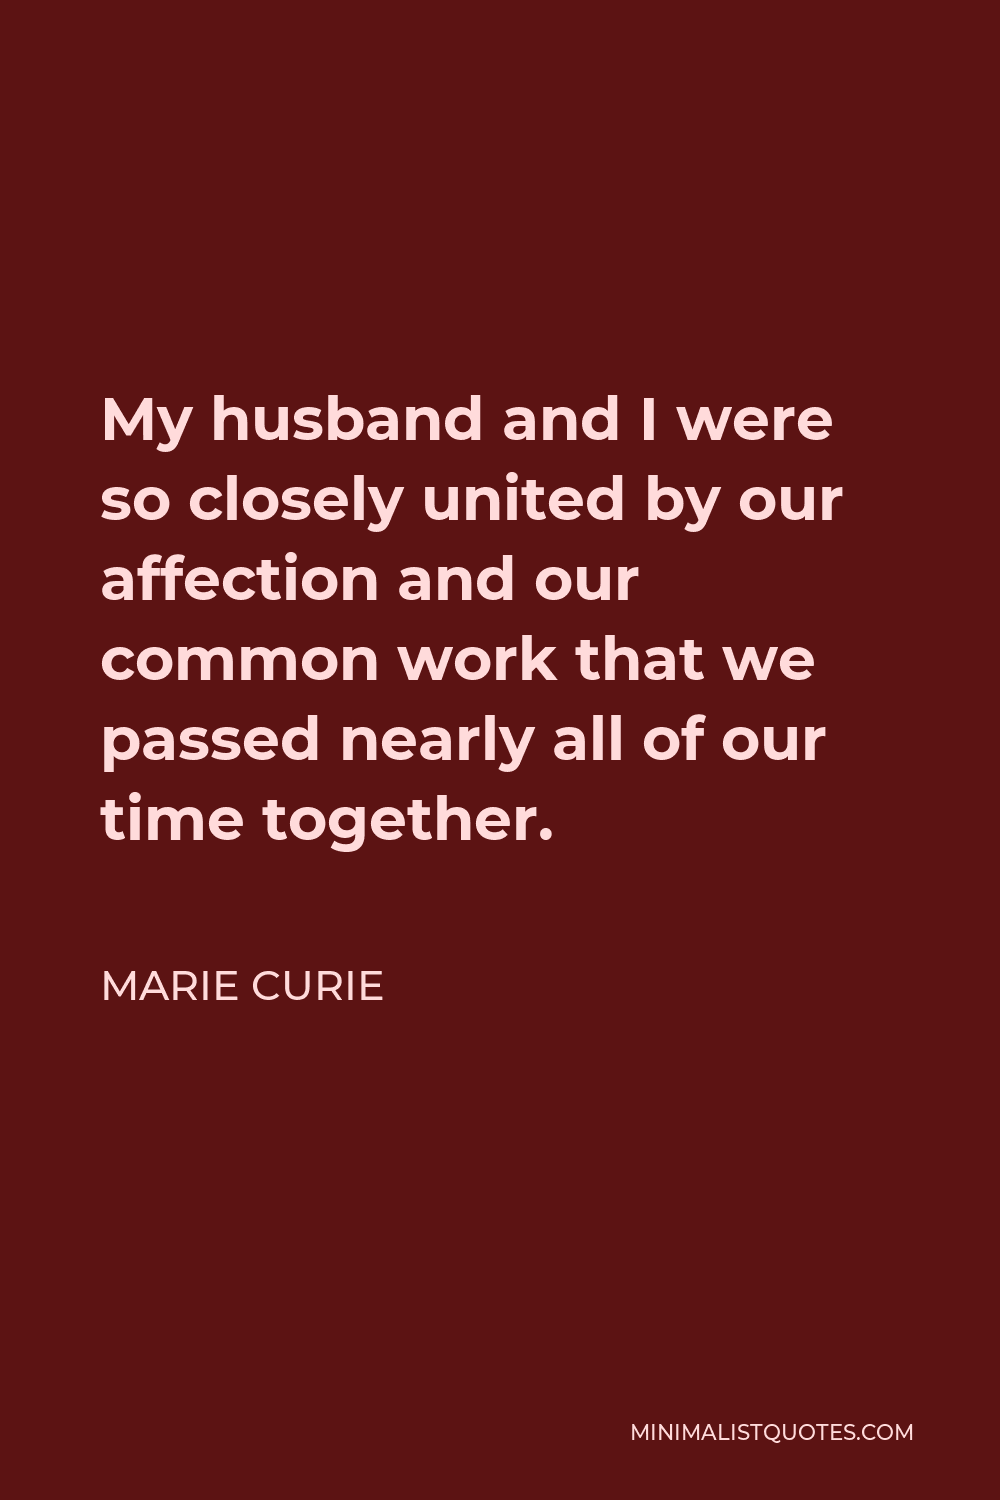 Marie Curie Quote - My husband and I were so closely united by our affection and our common work that we passed nearly all of our time together.